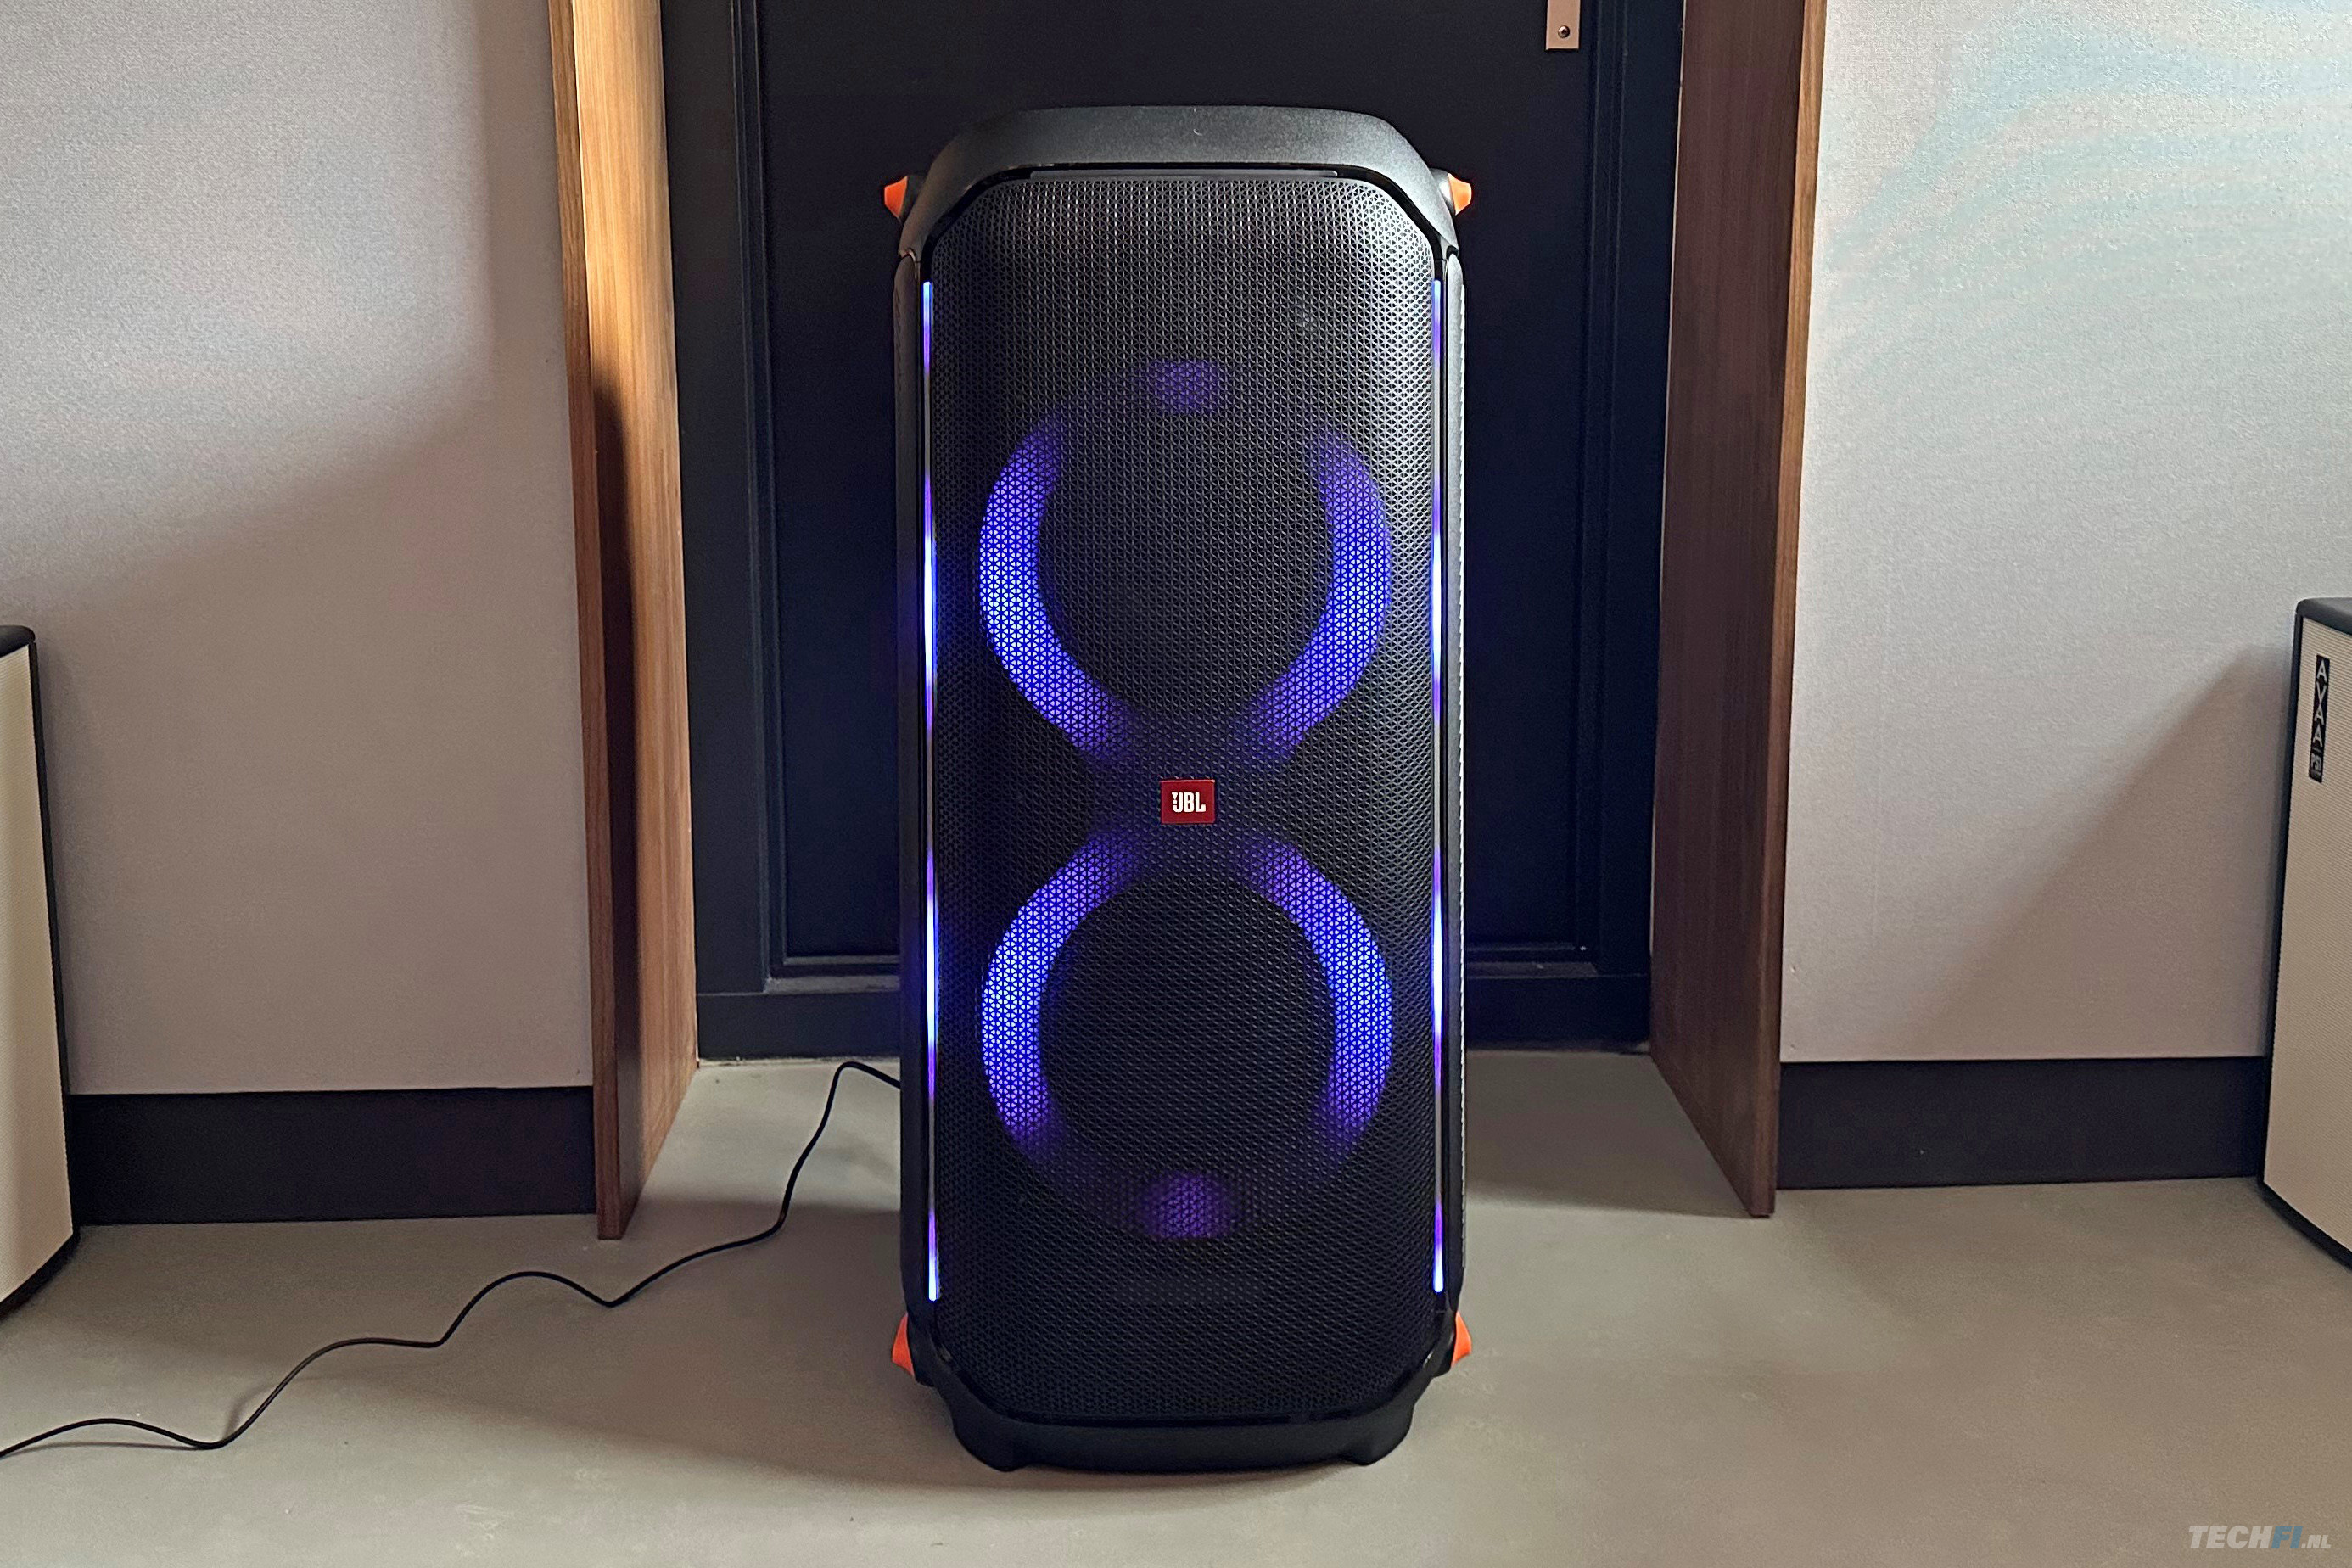 JBL Partybox 710 Review - Its Your Personal Earthquake Machine